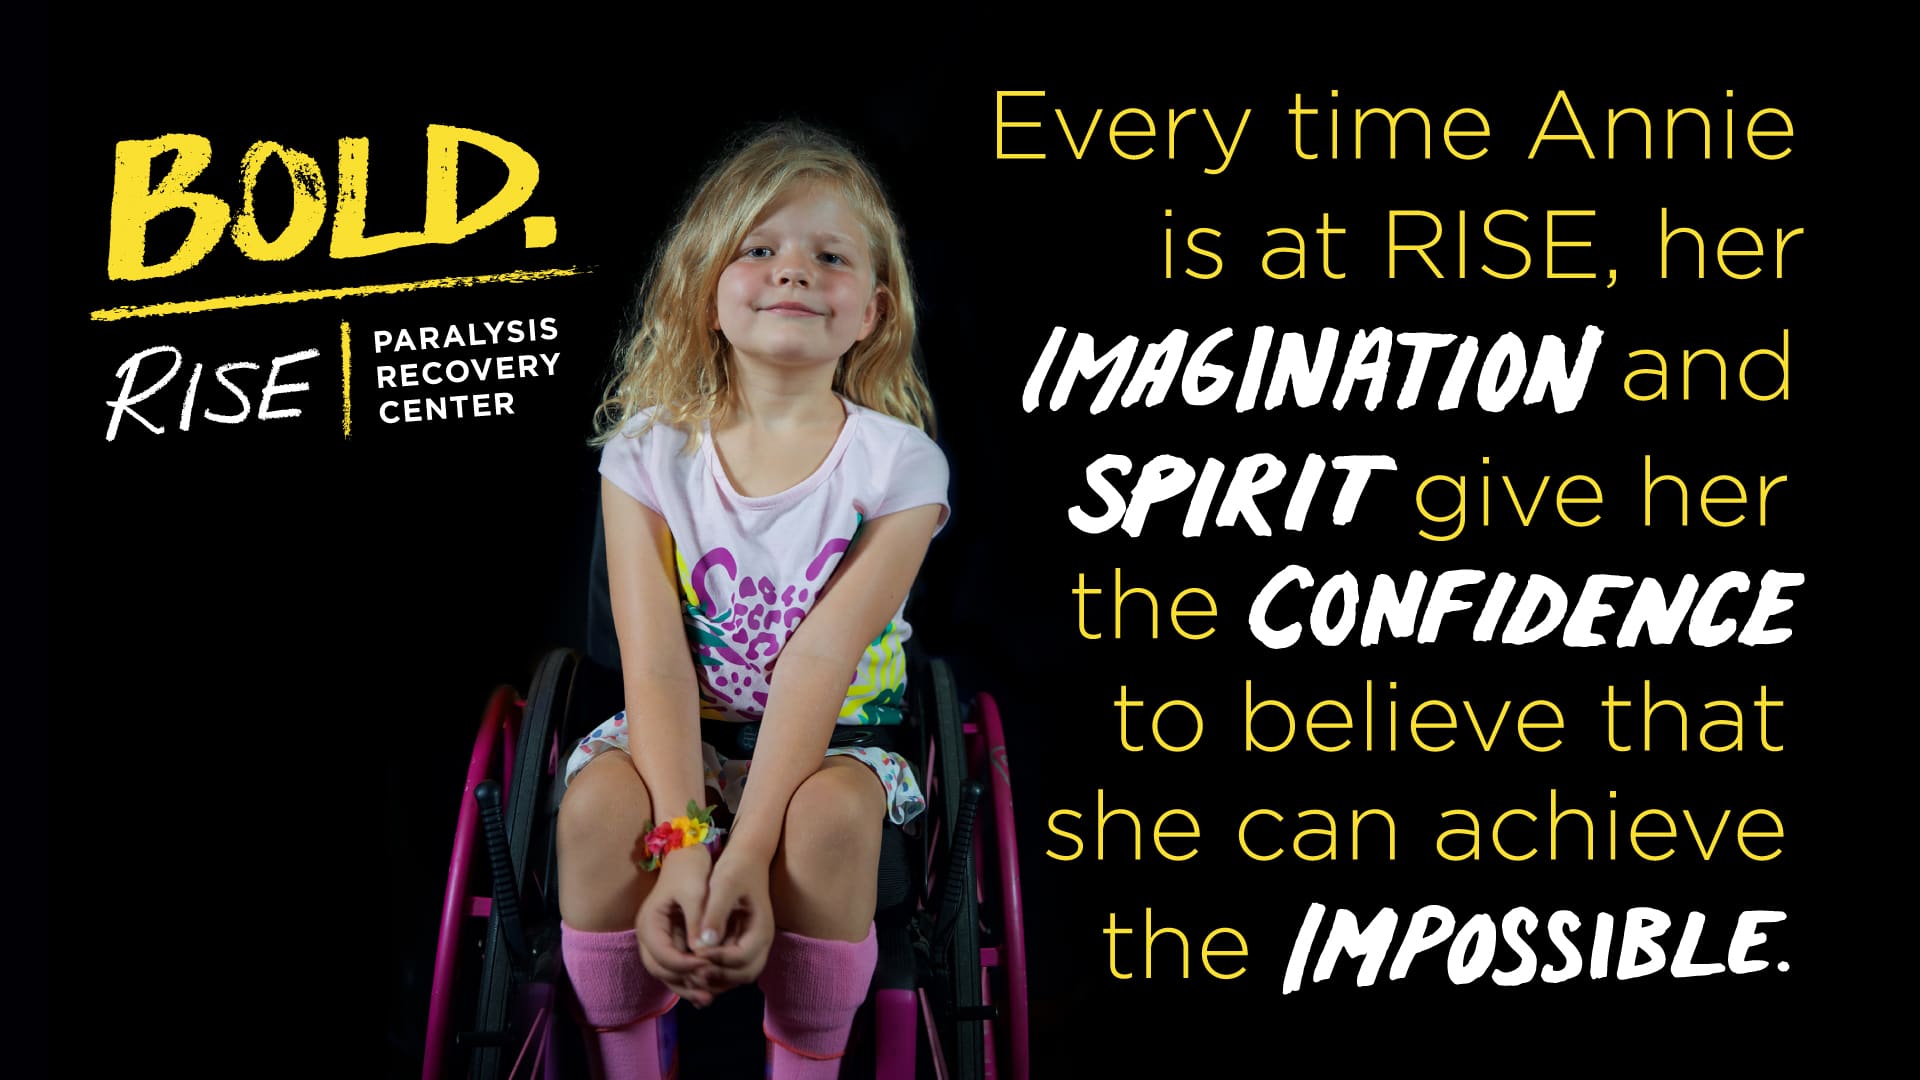 A little girl with blond hair in a pink wheelchair. The image reads, "Every time Annie is at RISE, her imagination and spirit give her the confidence to believe that she can achieve the impossible. 